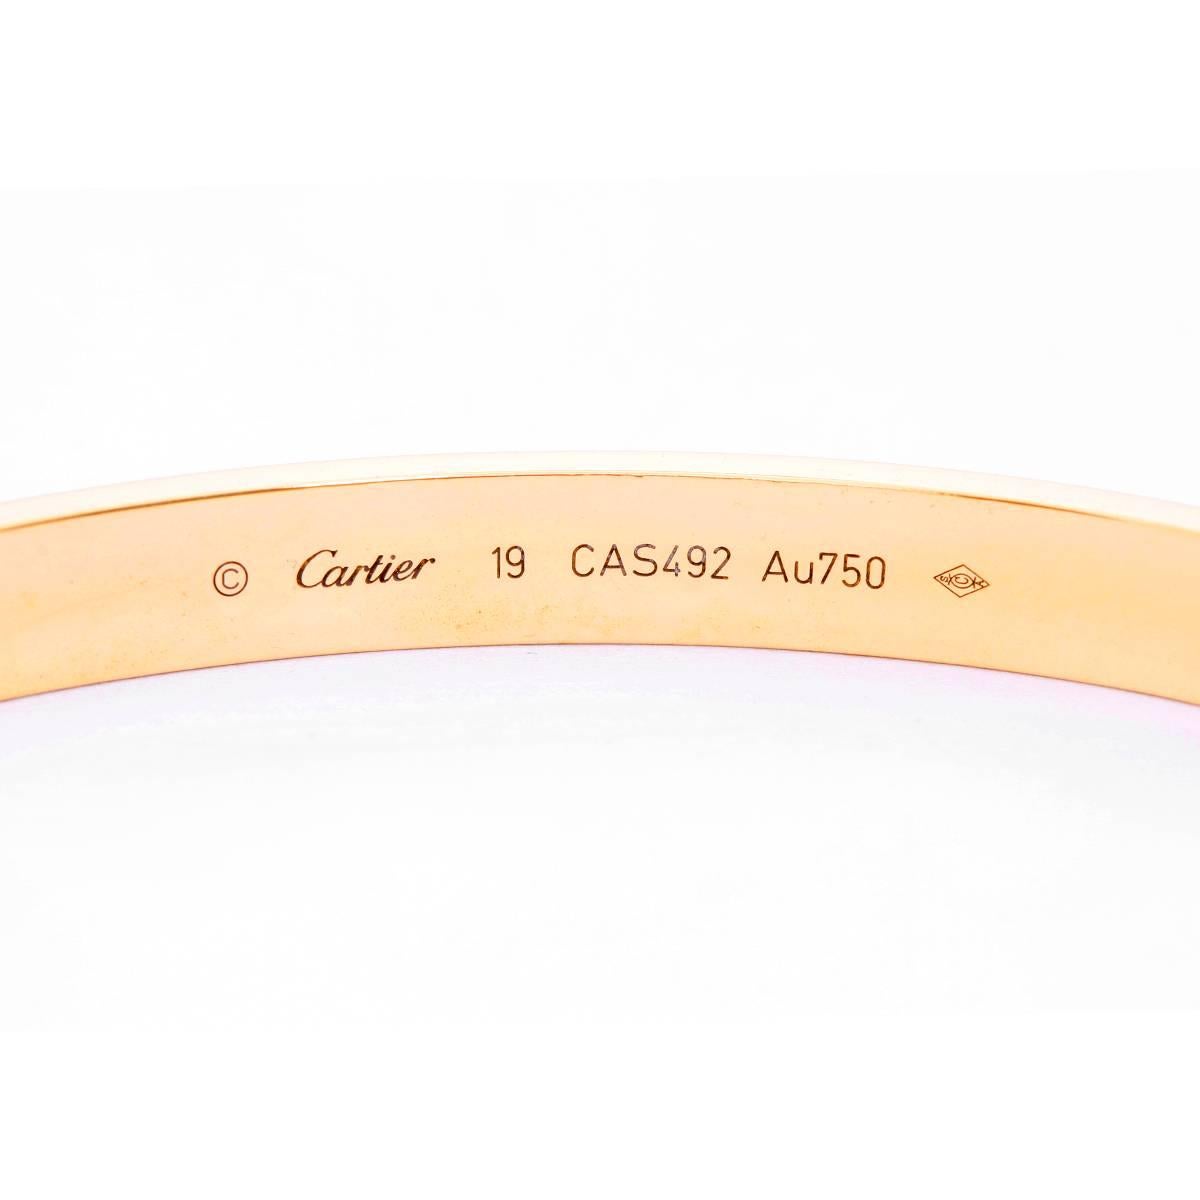 Cartier Love Bracelet 18k Yellow Gold Size 19 with Screwdriver - . This beautiful bracelet is stamped Cartier, 19, 750  and  CAS492.  This is a great piece for everyday as well as dress. Authenticity guaranteed. Like new condition with no dings or